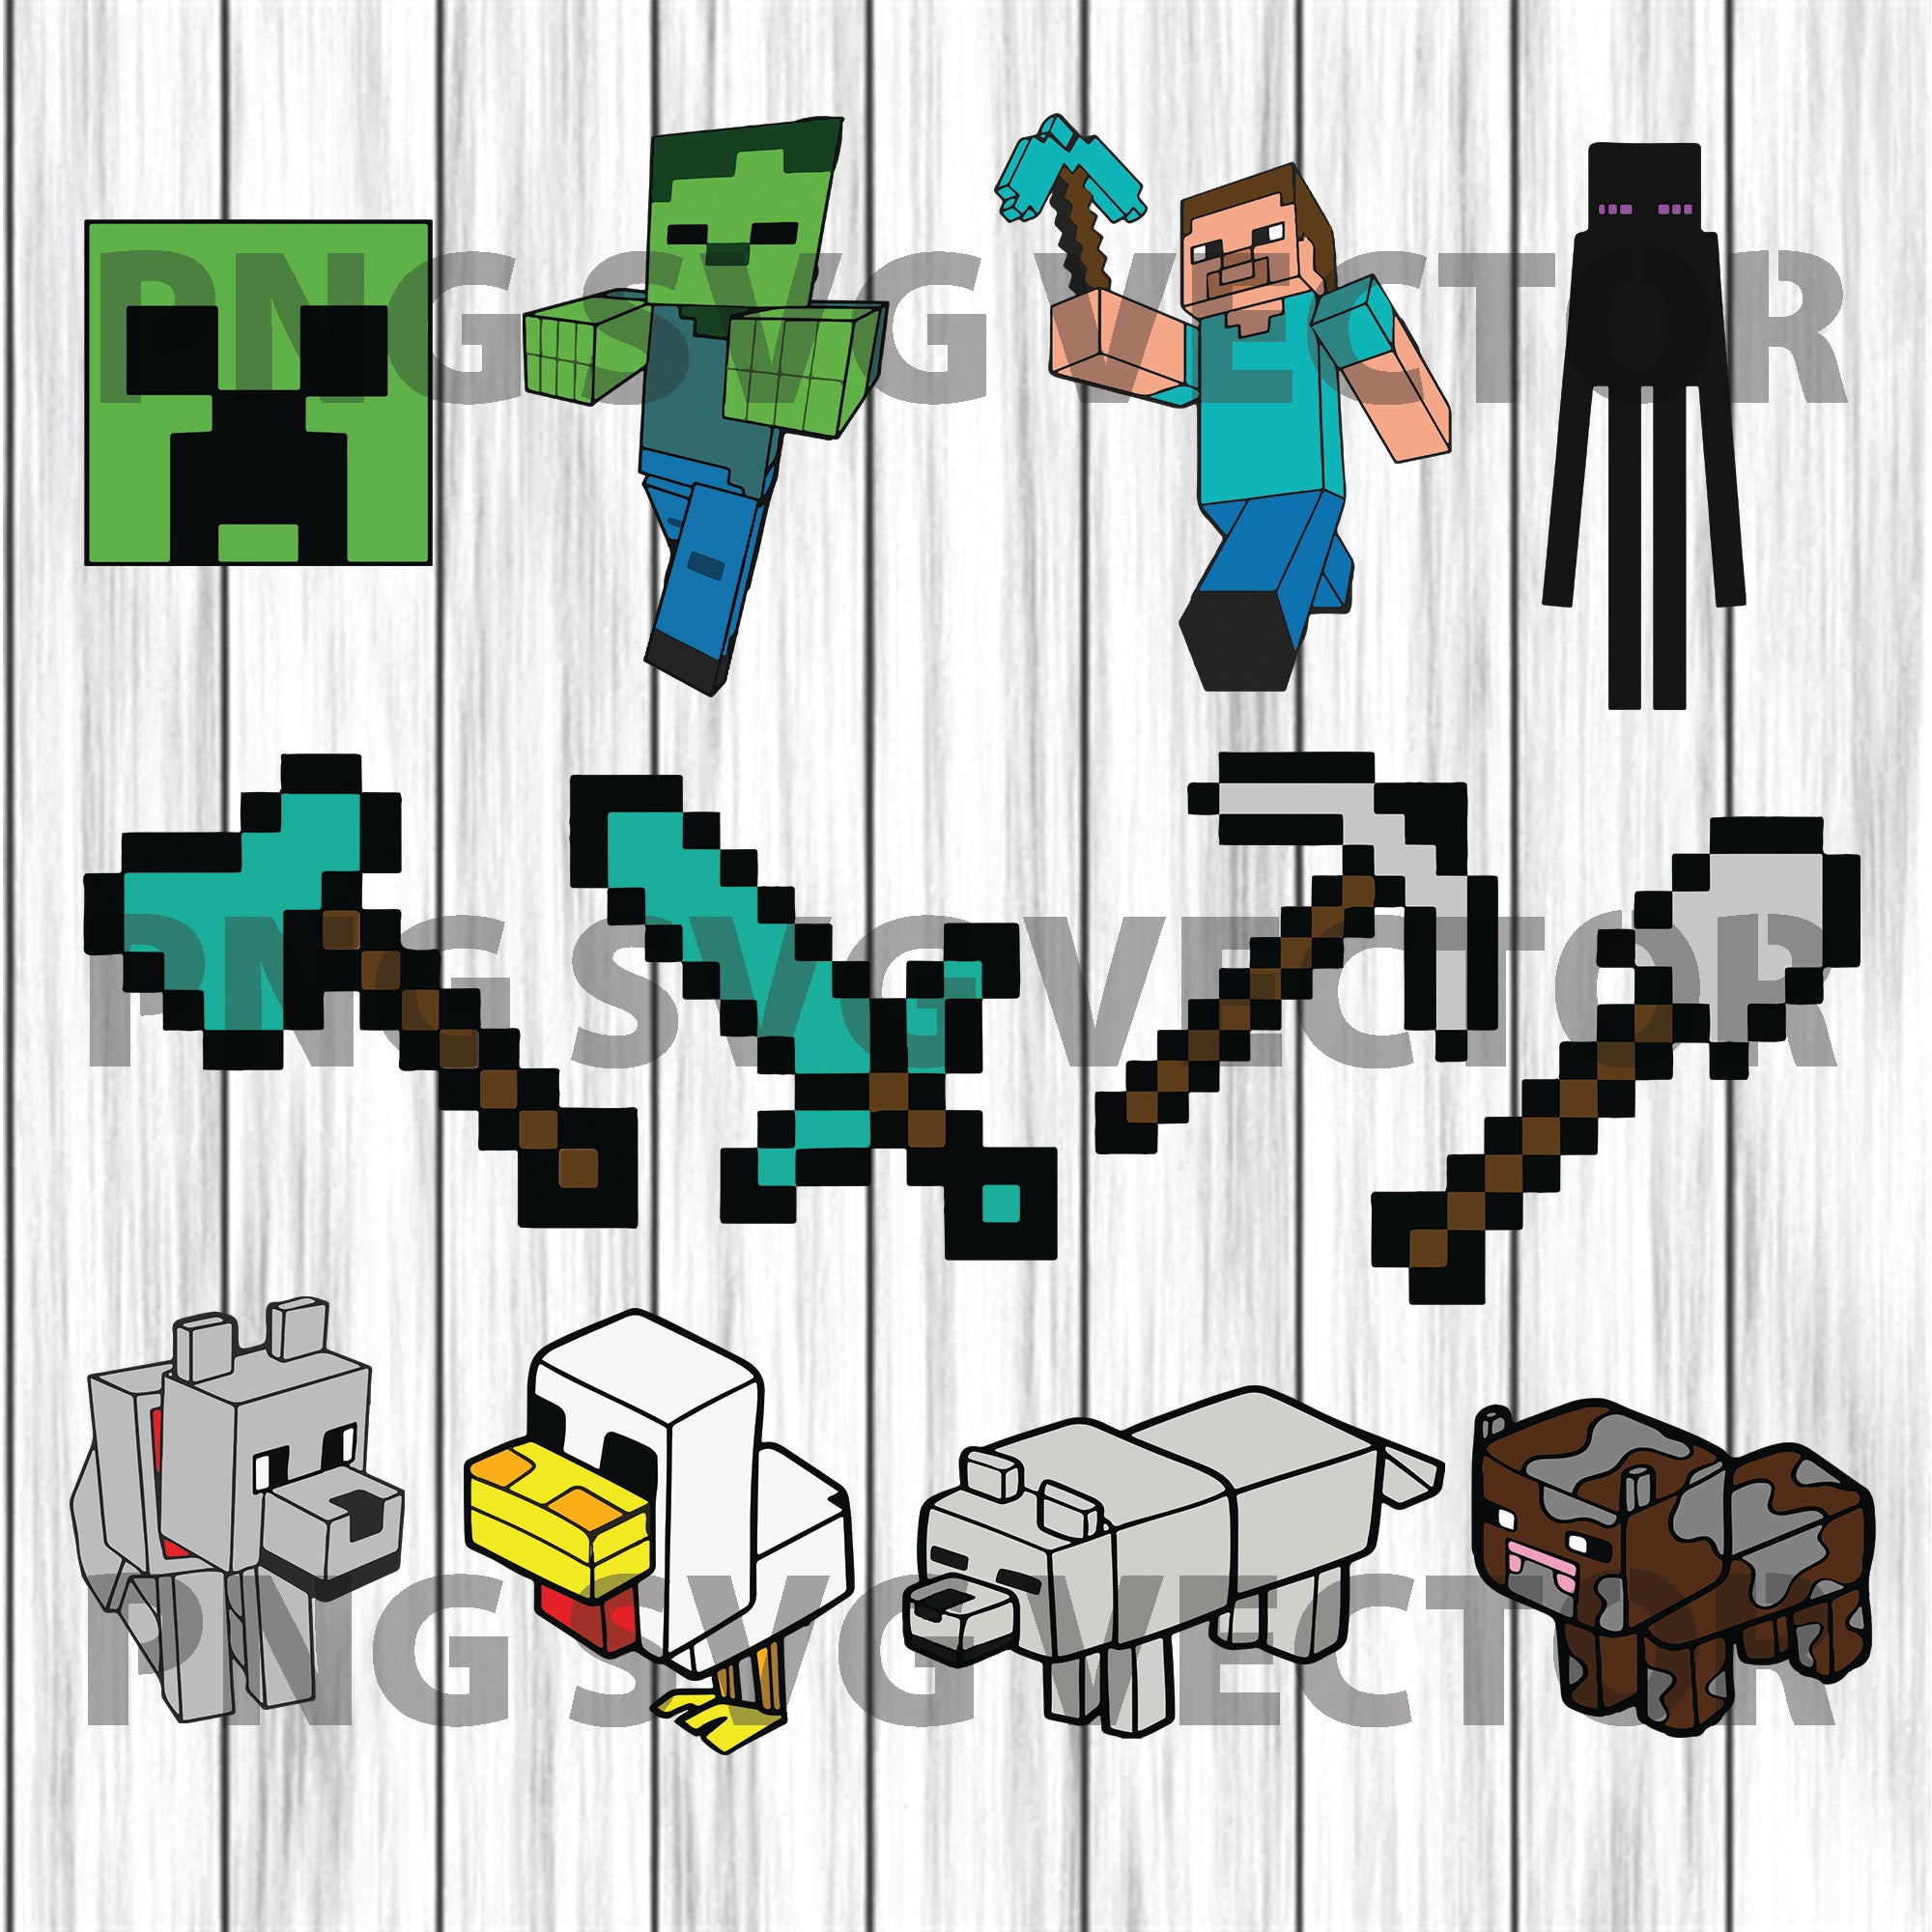 Download Minecraft Svg Minecraft Clipart Minecraft Cutting File Minecraft Fi Beetanosvg Scalable Vector Graphics SVG, PNG, EPS, DXF File